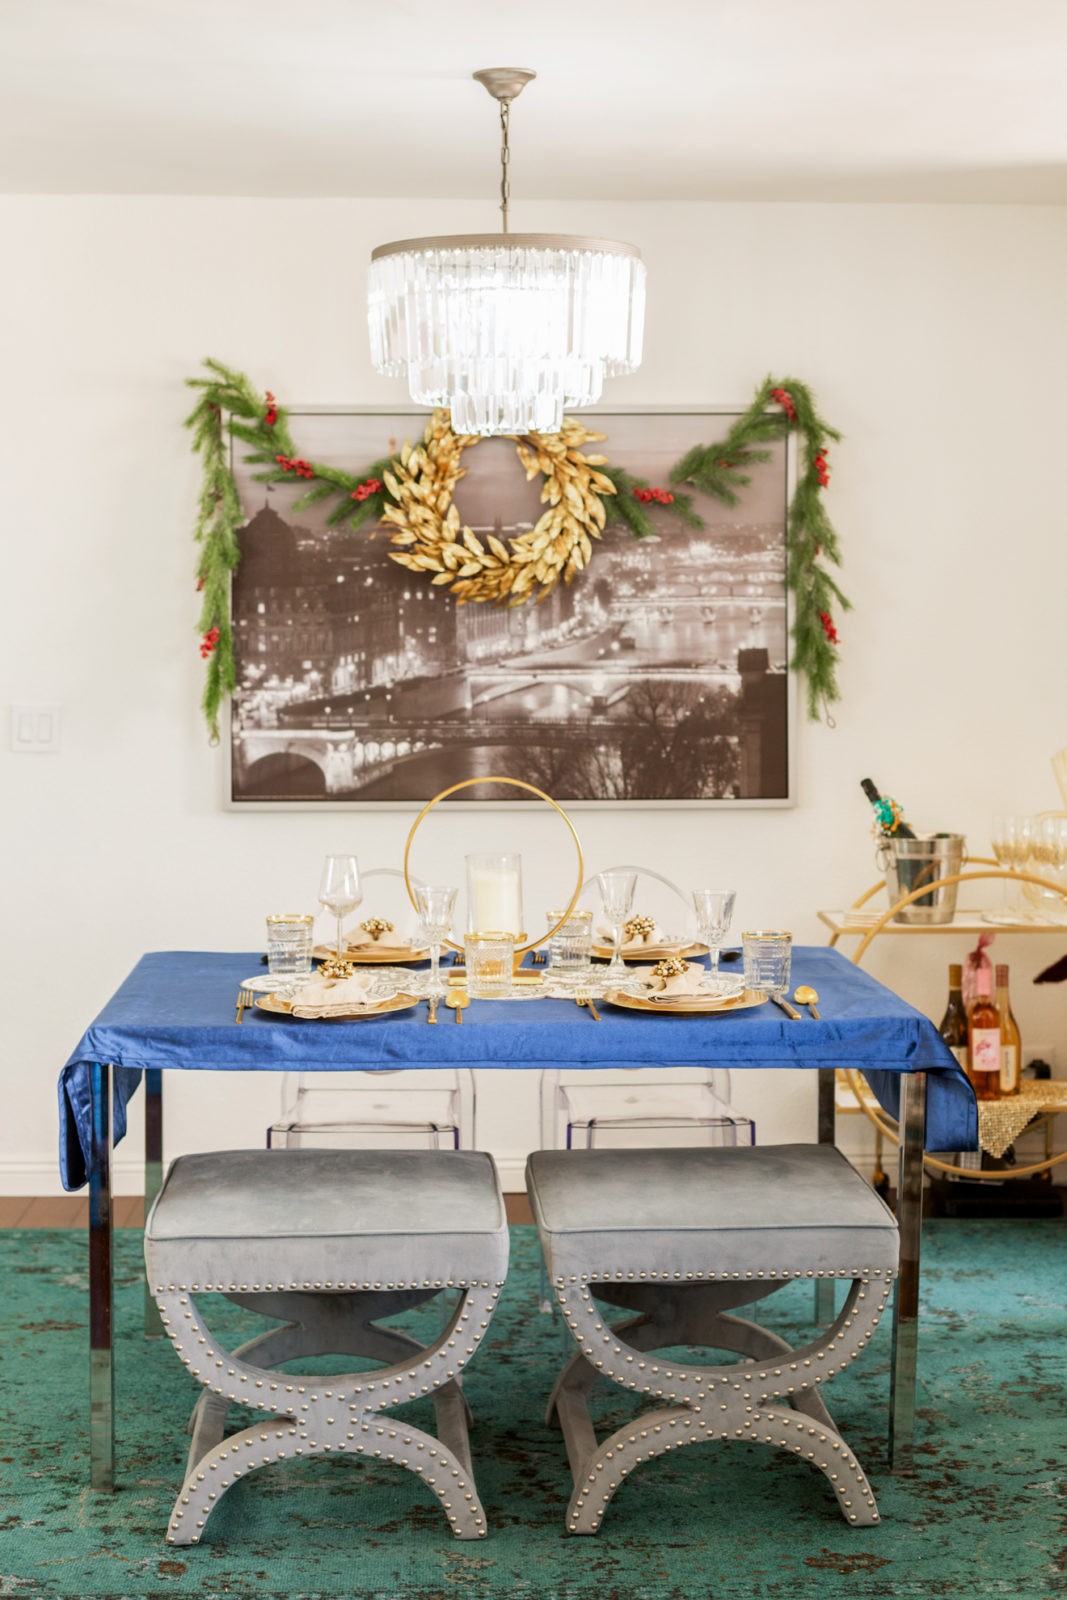 Holiday Home Decor 2019 by popular Los Angeles life and style blogger, Laura Lily: image of a dining room with overstock stools and chandelier, RugsUSA rug, and Z Gallerie bar cart.